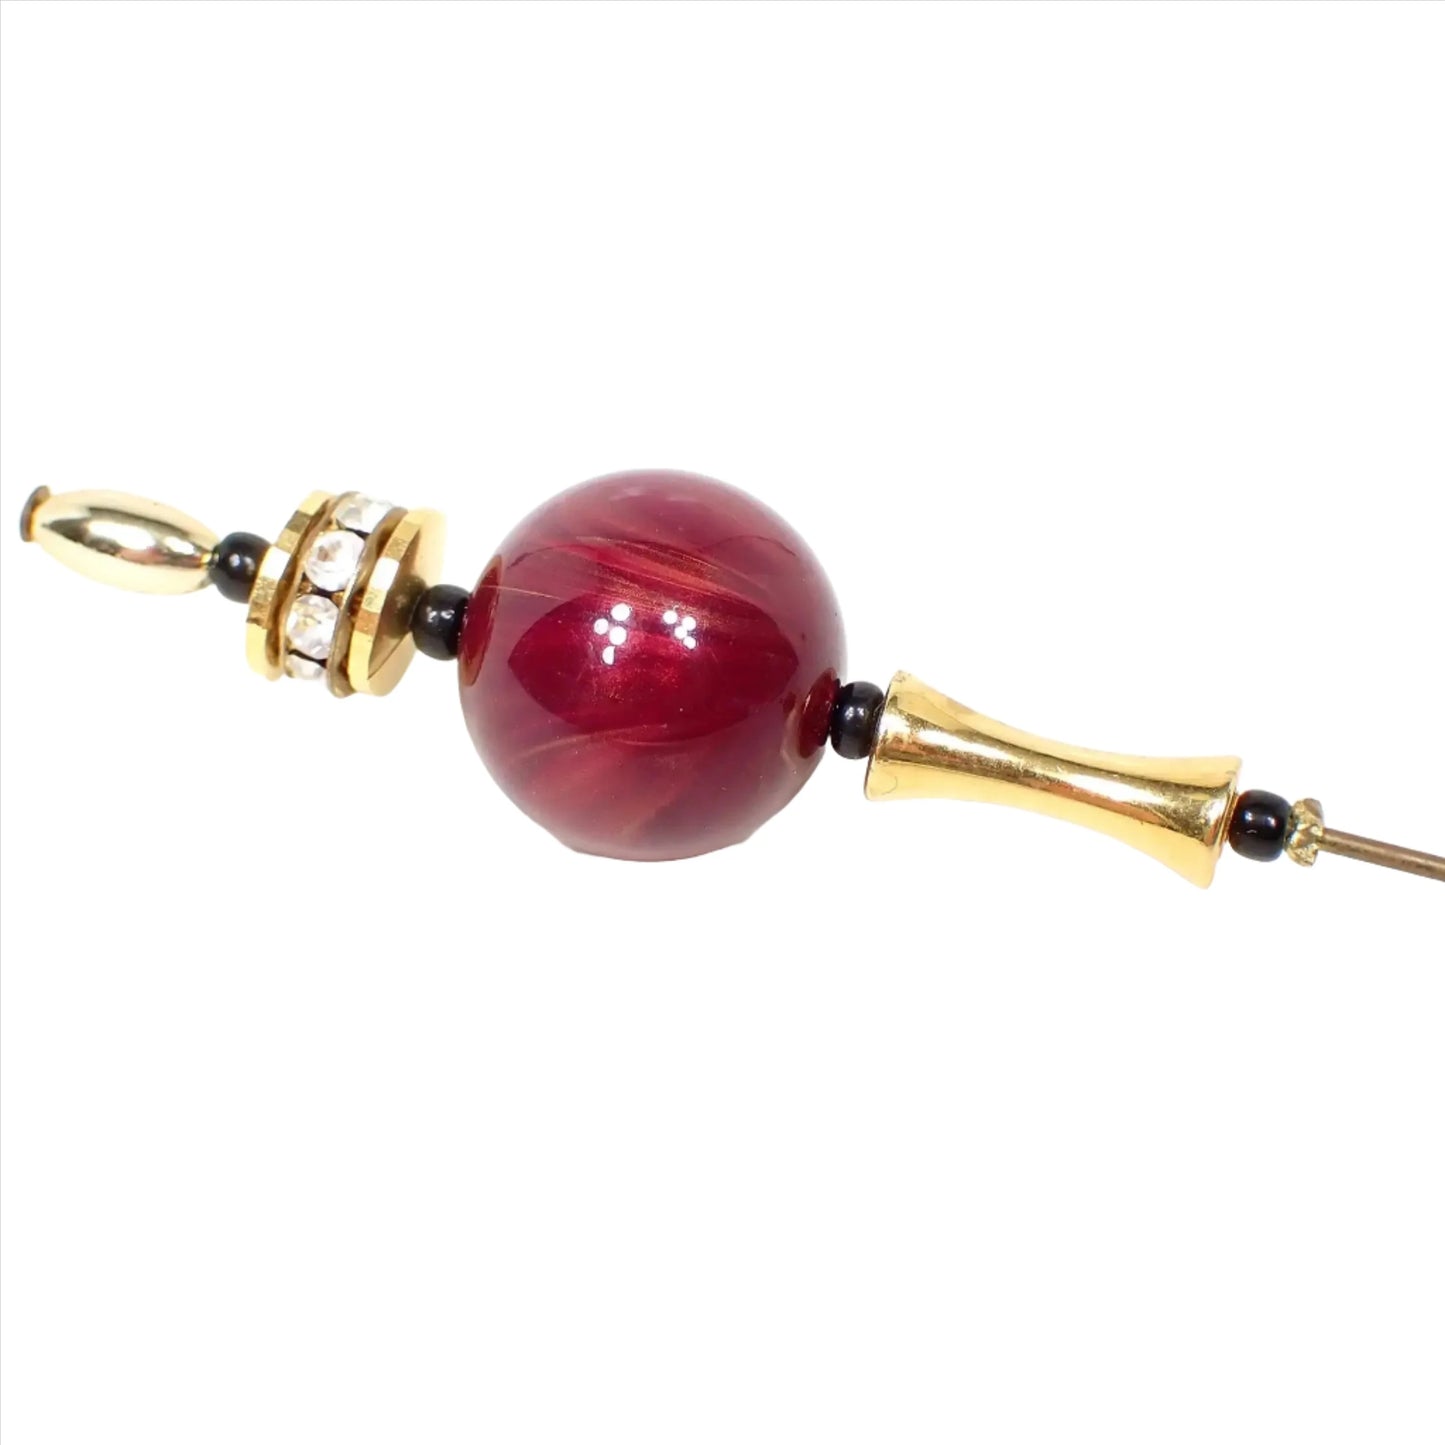 Enlarged angled view of the top of the retro vintage stick pin. The metal is gold tone in color, but the pin has darkened some from age for a more antiqued gold tone appearance. There is a disc shaped bead at the top with clear round rhinestones all the way around it. Underneath that is a round ball shaped lucite bead that has marbled shades of purple and pink for a fuchsia look.